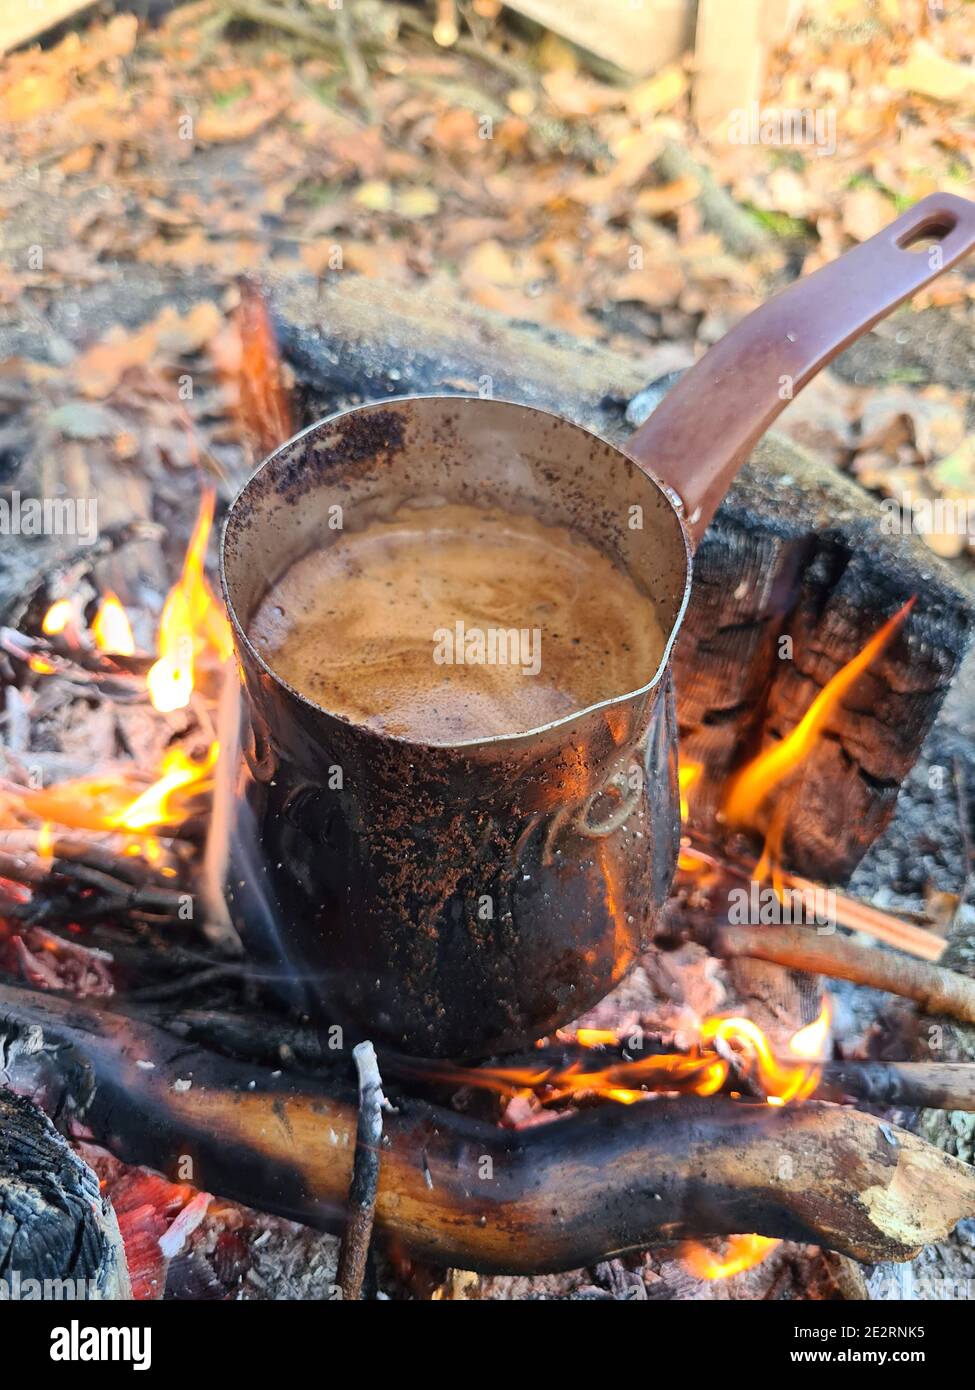 https://c8.alamy.com/comp/2E2RNK5/coffee-is-prepared-in-cezve-on-fire-vertical-image-2E2RNK5.jpg